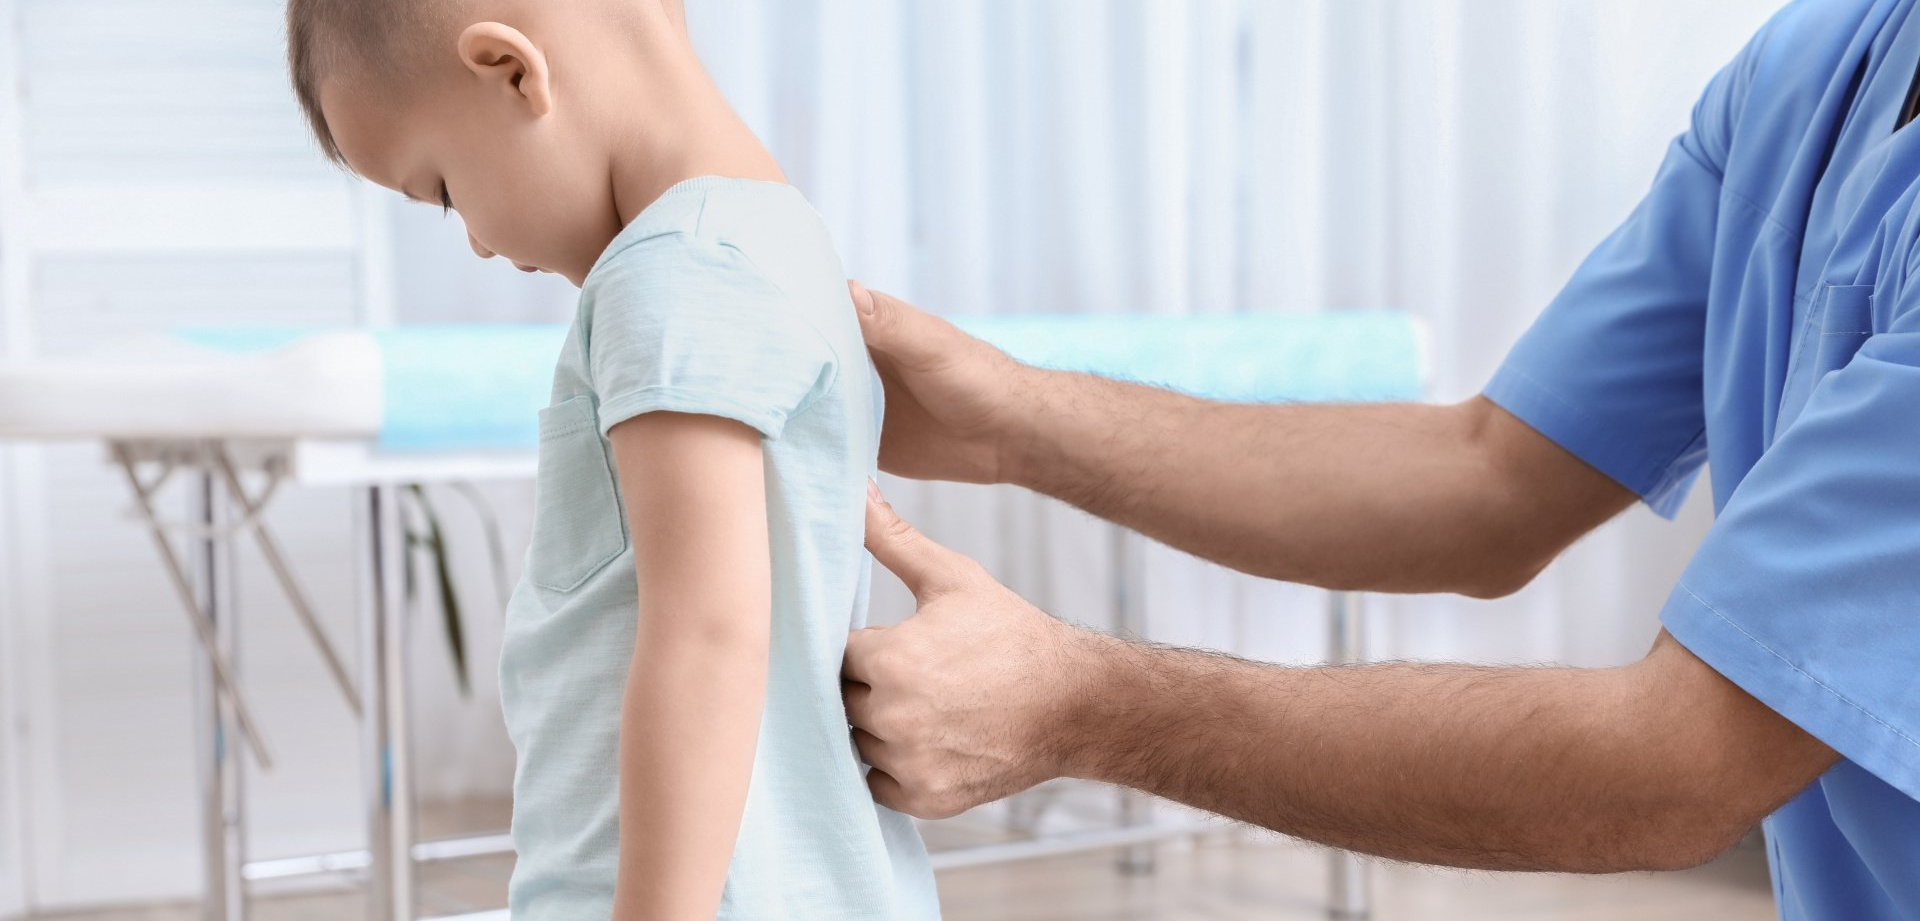 does my child have scoliosis?